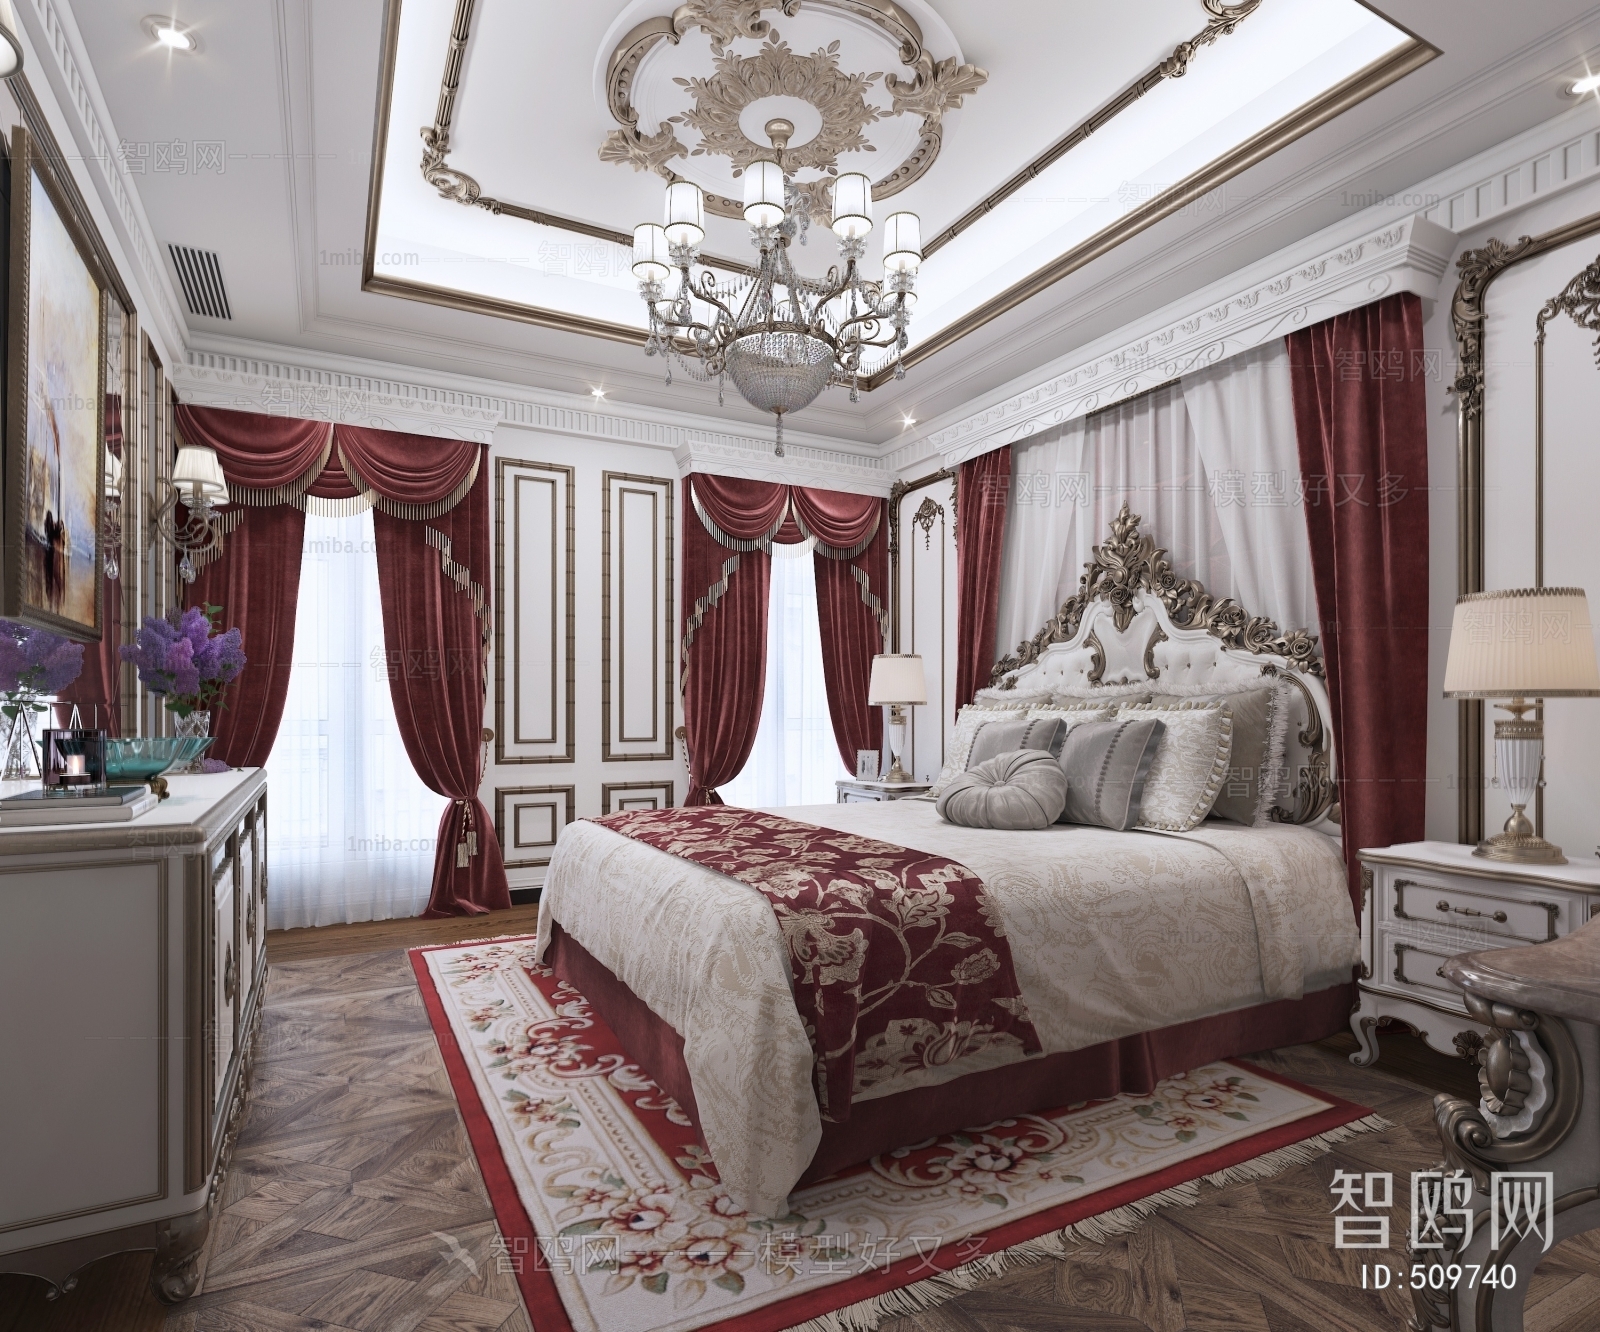 Classical Style Bedroom